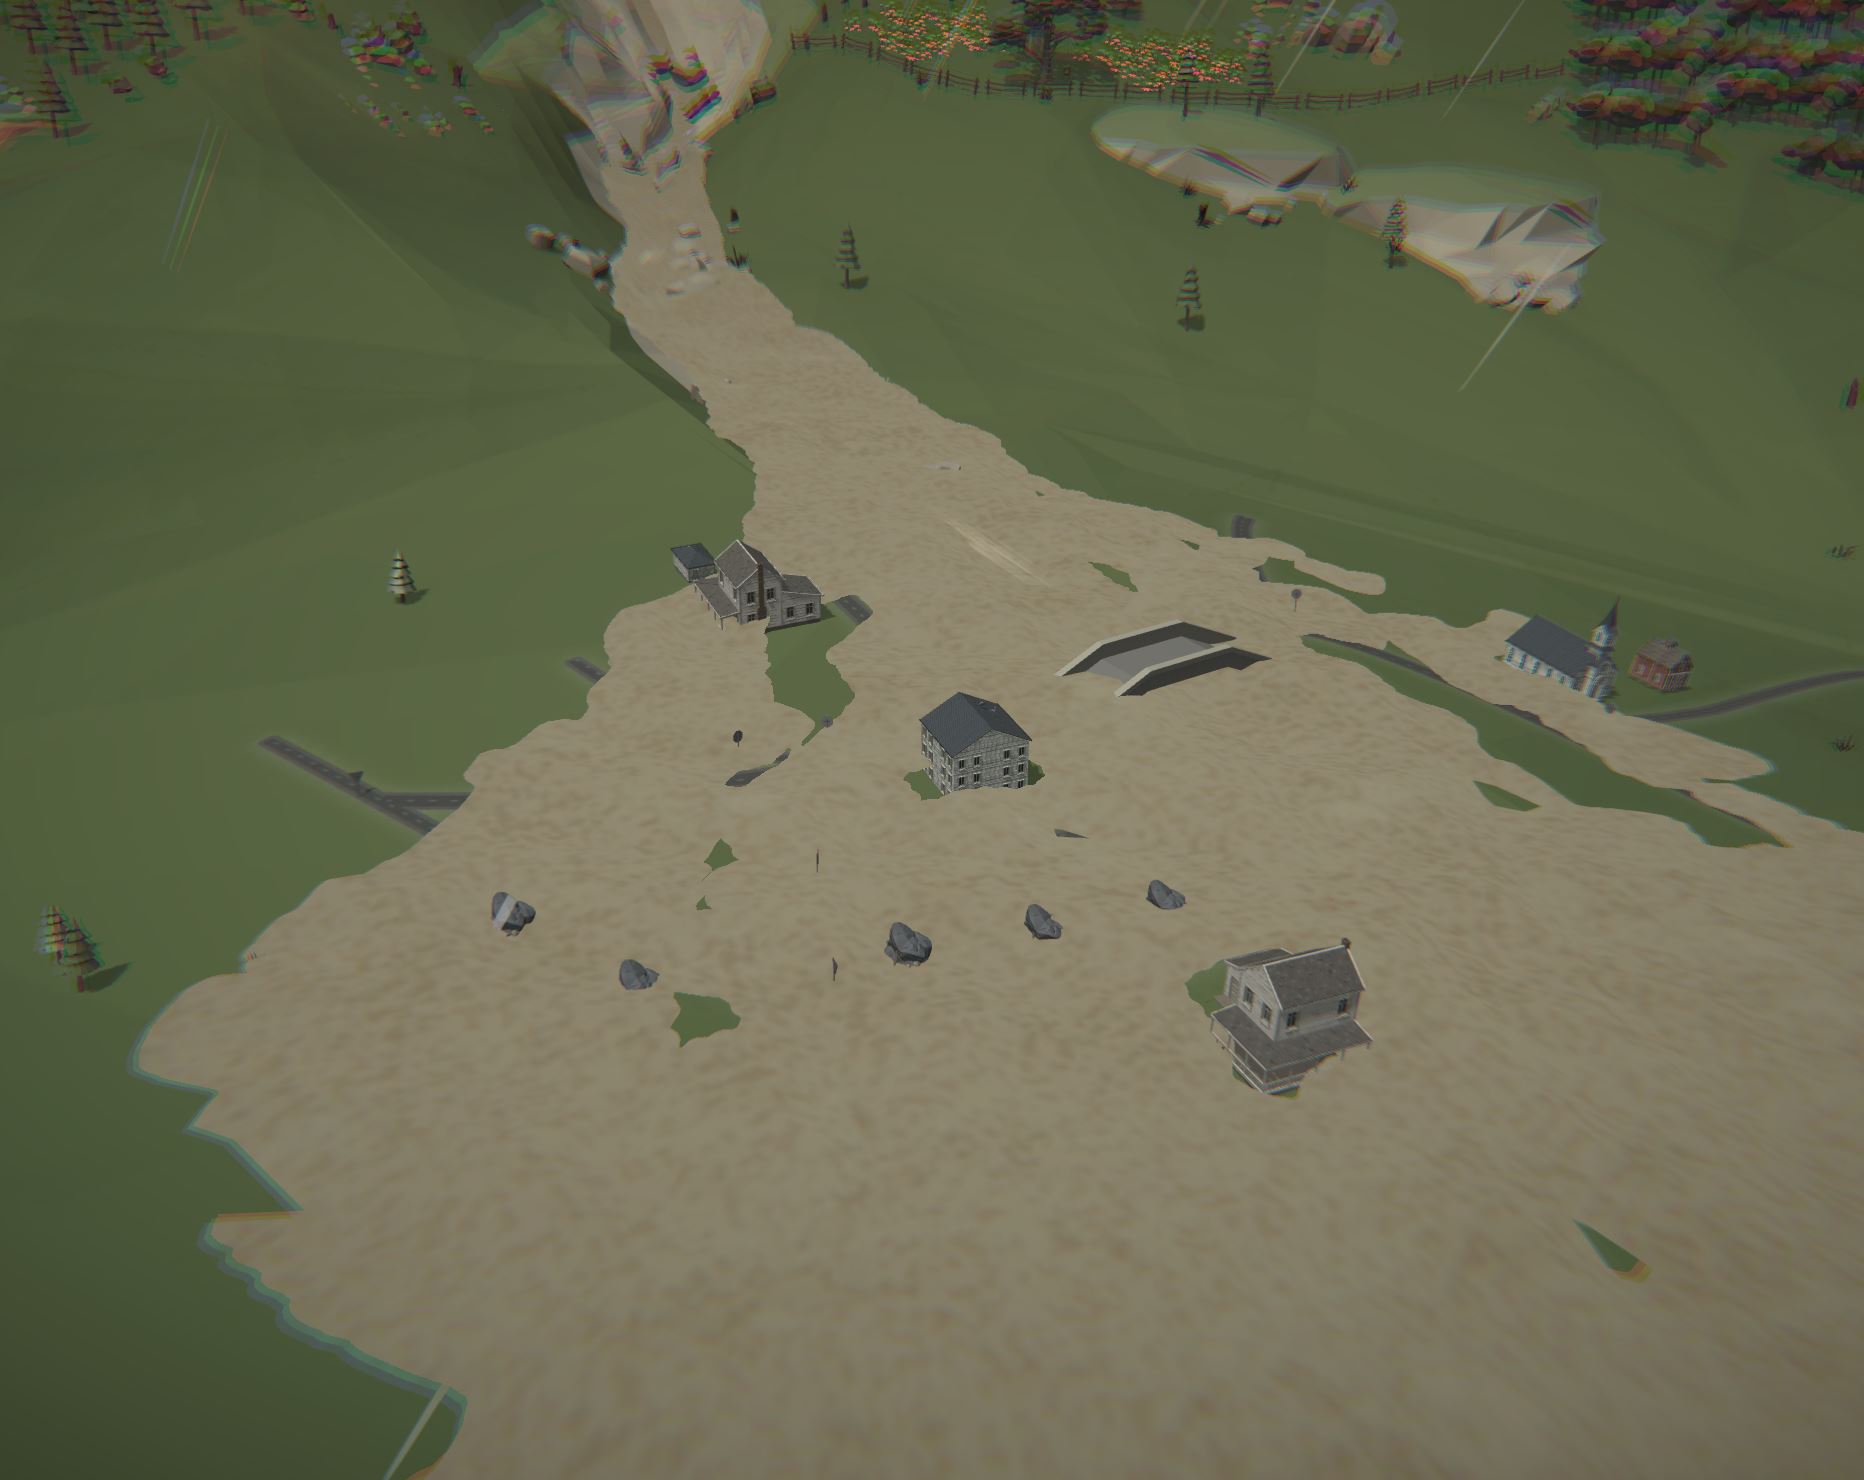 A simulation of a large debris flow on a small village in Murgame.